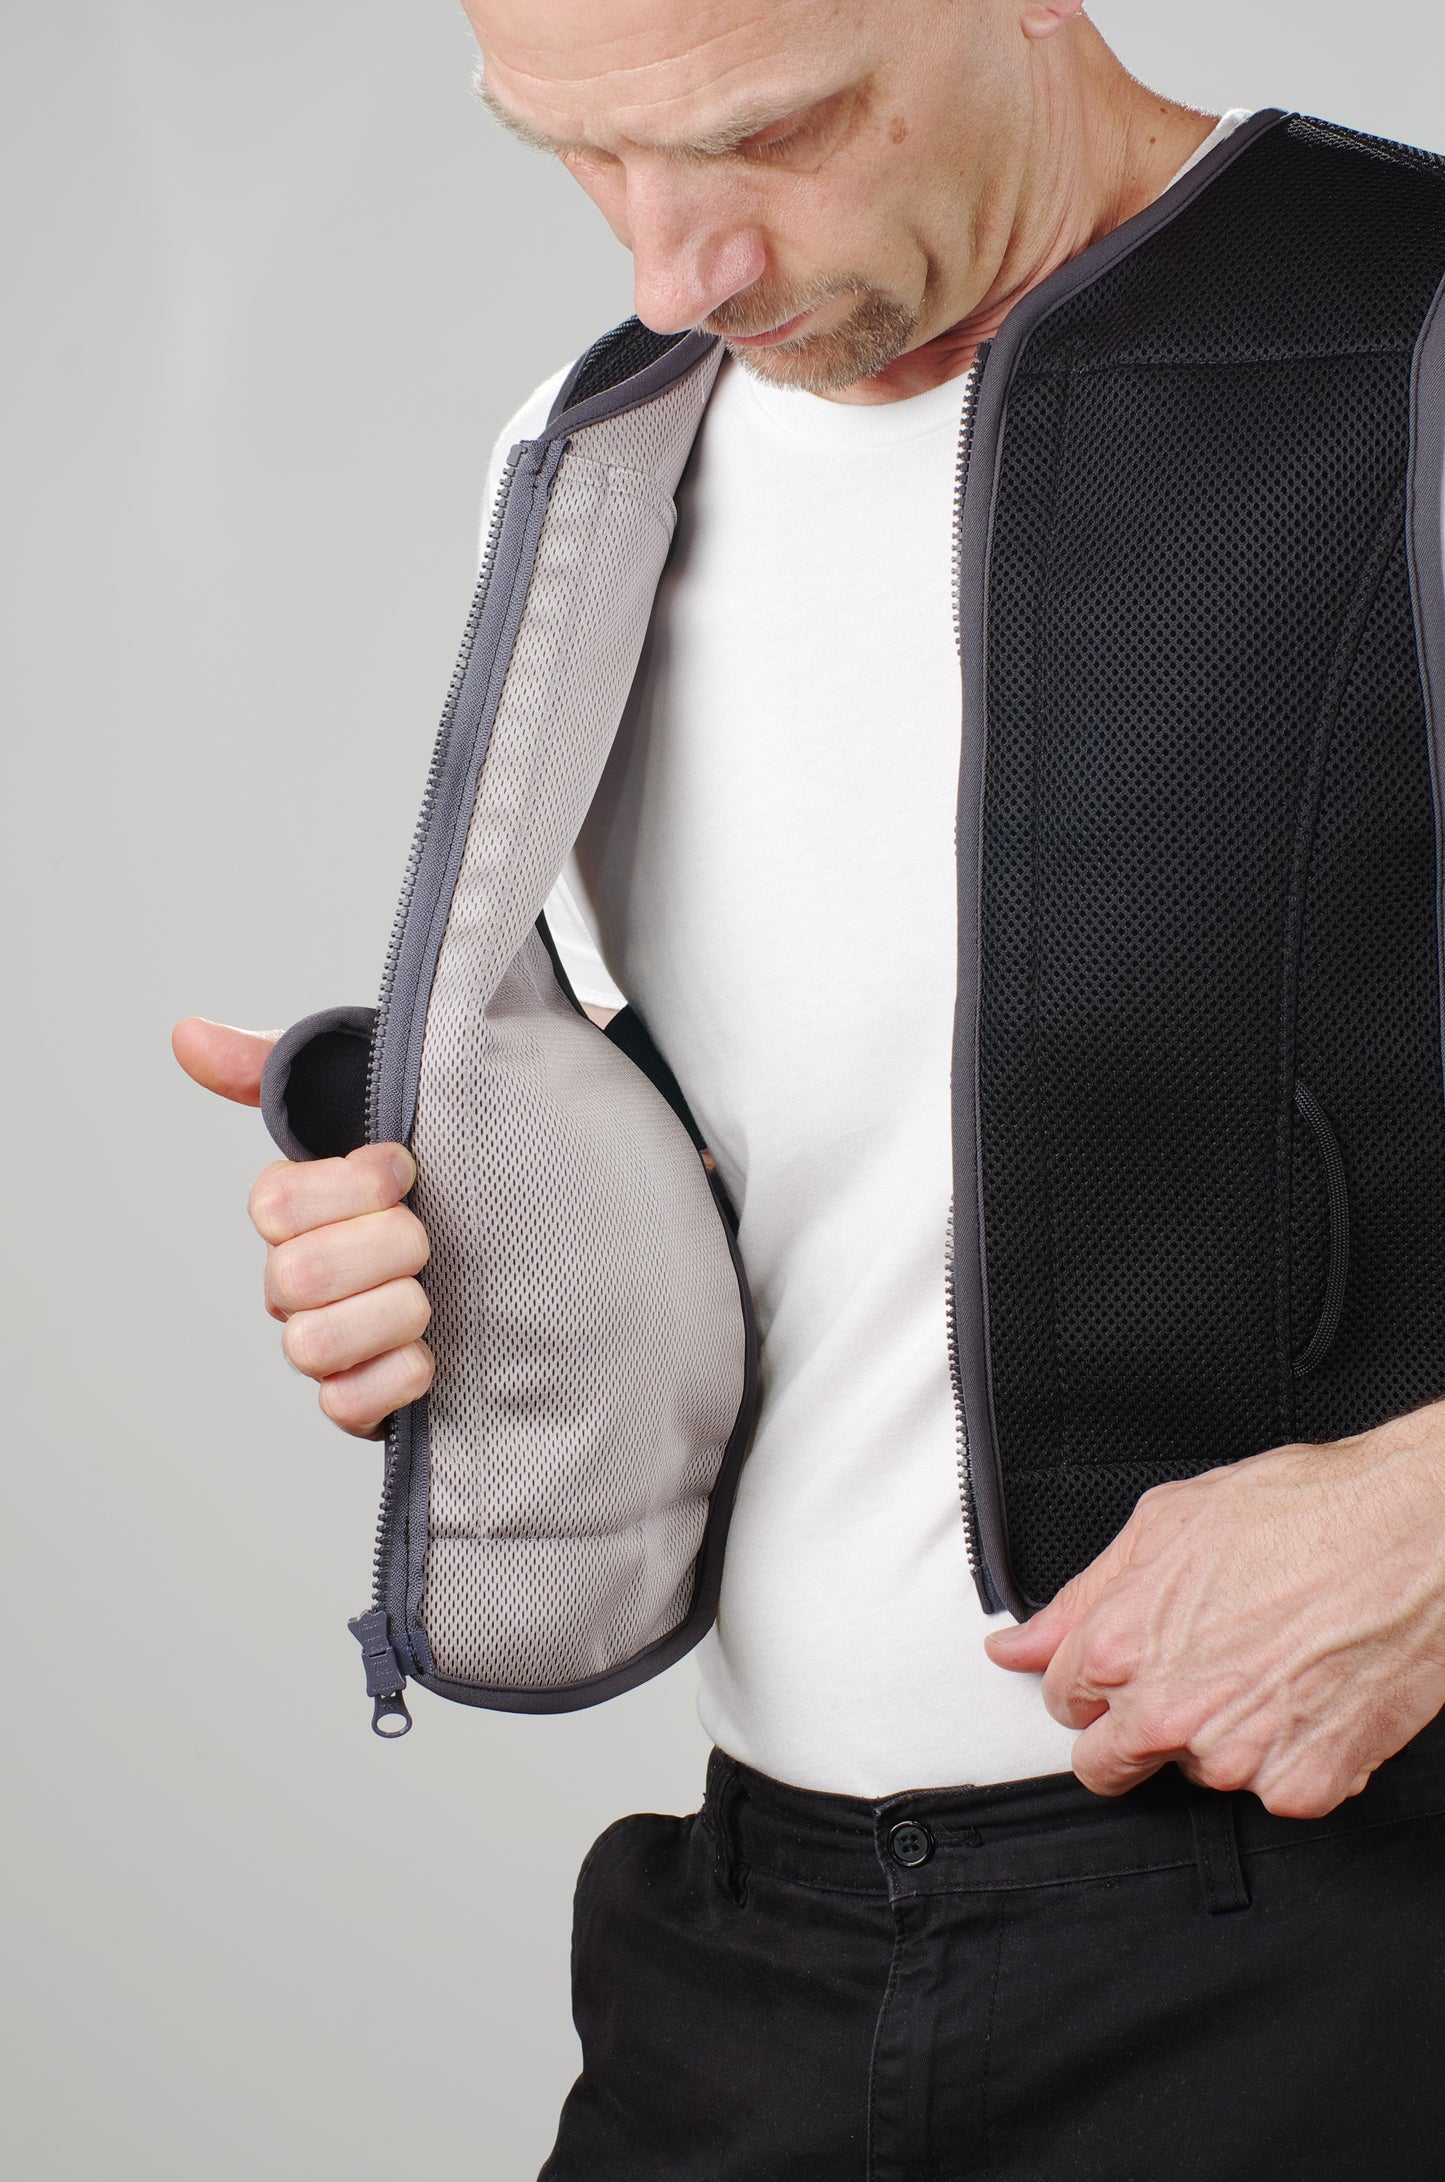 Our original Maximo Cooling Vest on a man